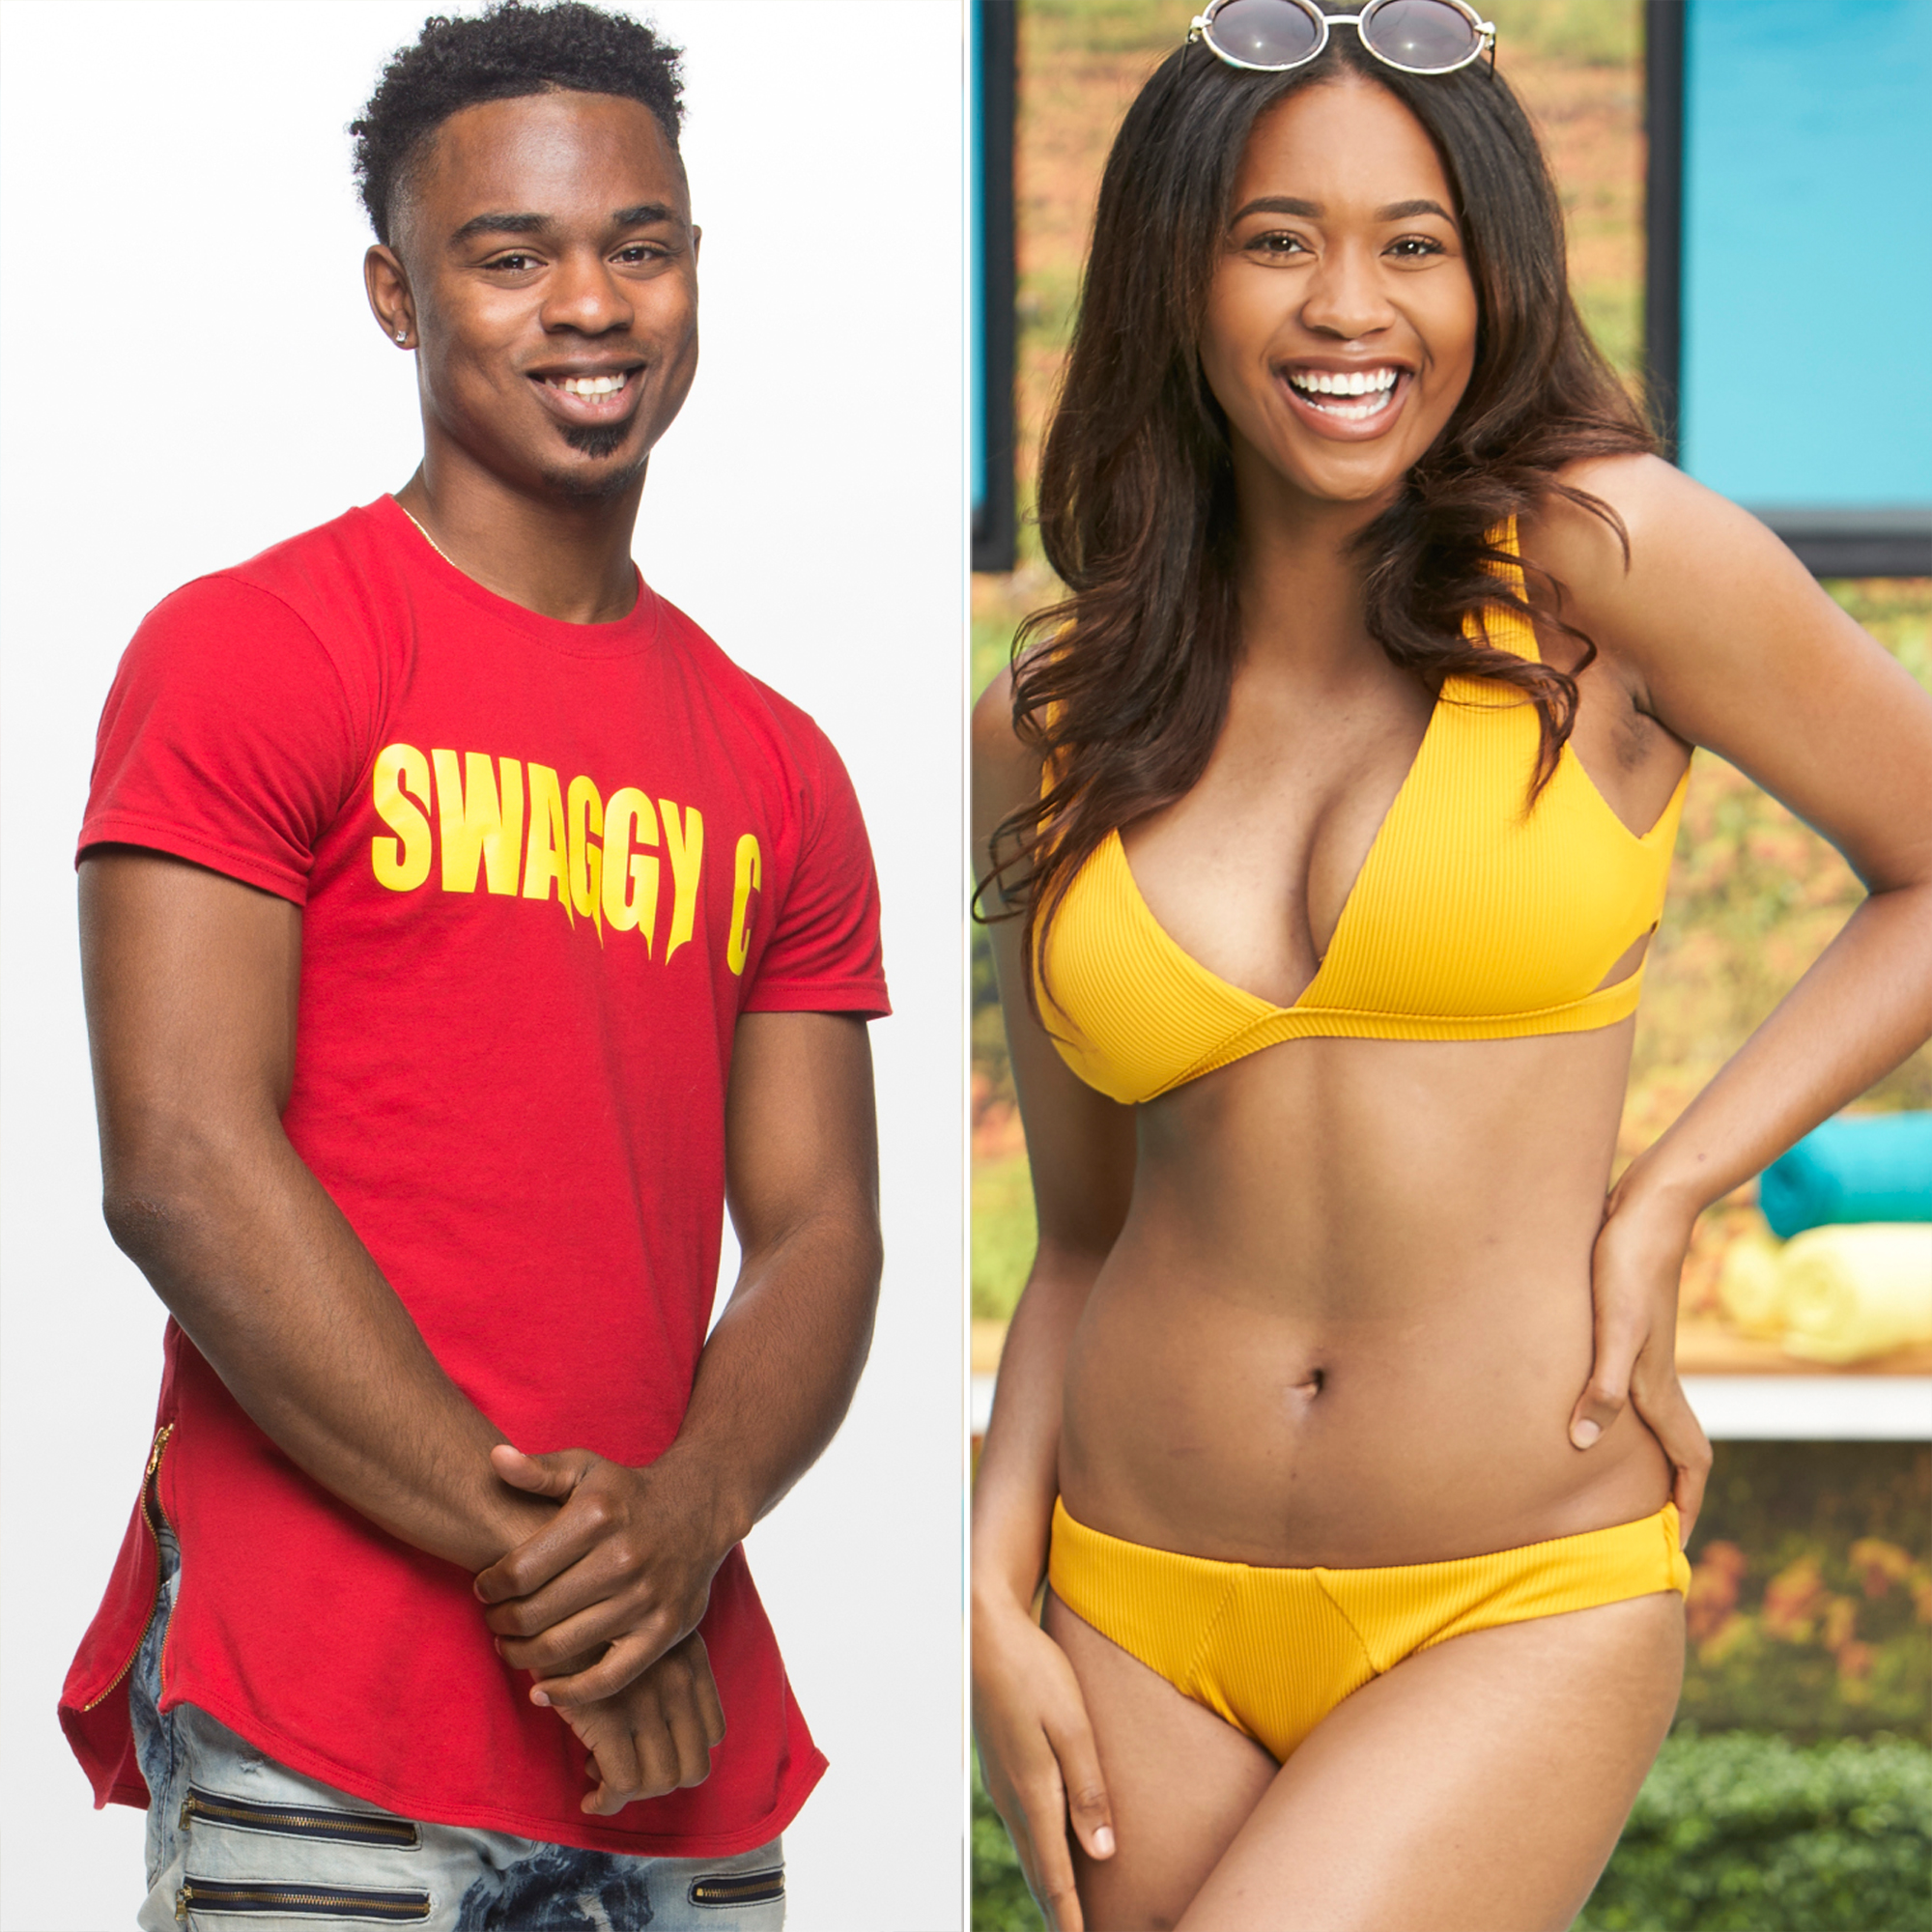 Big Brother S Swaggy C Bayleigh Dayton Will Move In Together Hot World Repo...